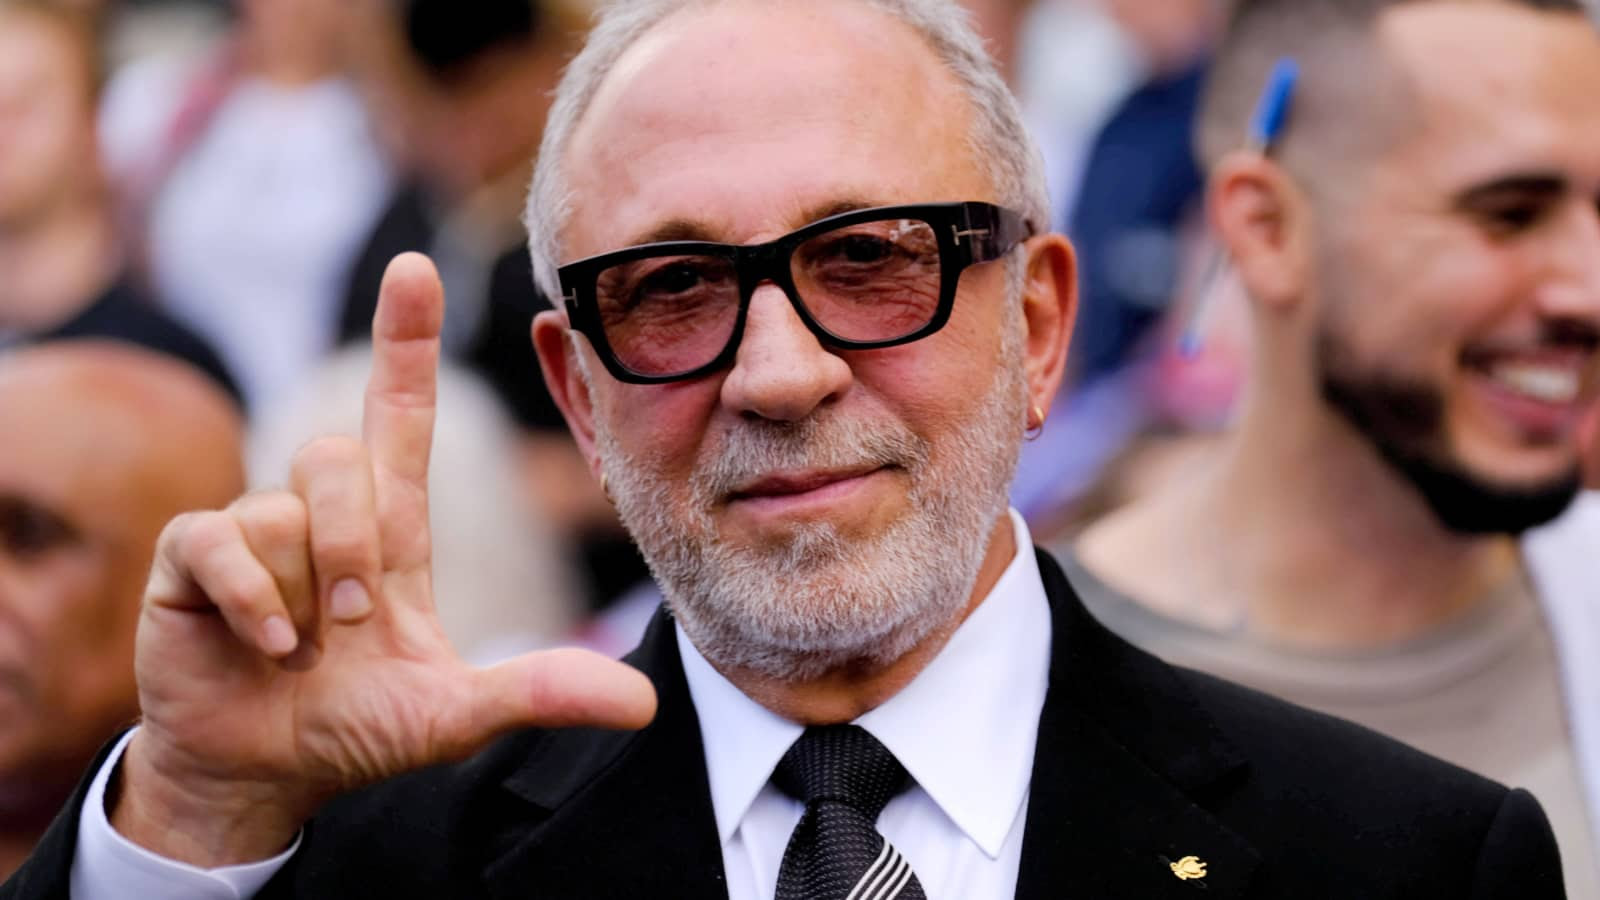 With representation lacking in media, Emilio Estefan urges Latinos to embrace their identities